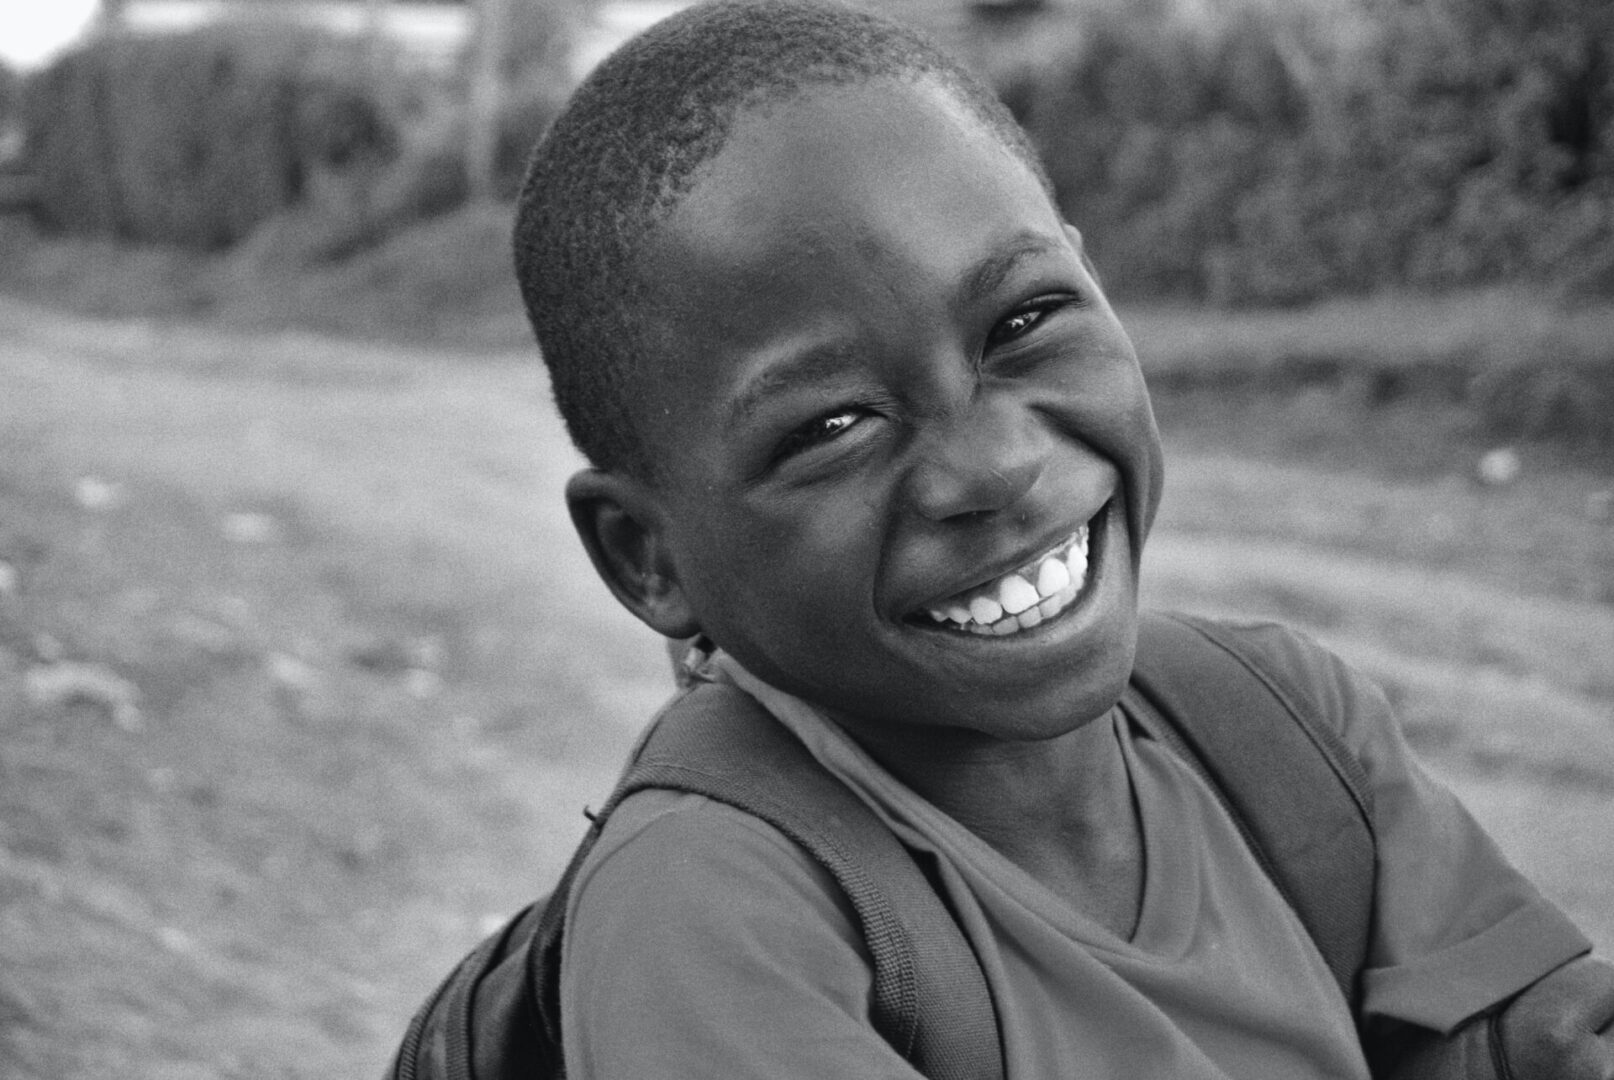 A black and white image of a small boy hanging a bag and smiling